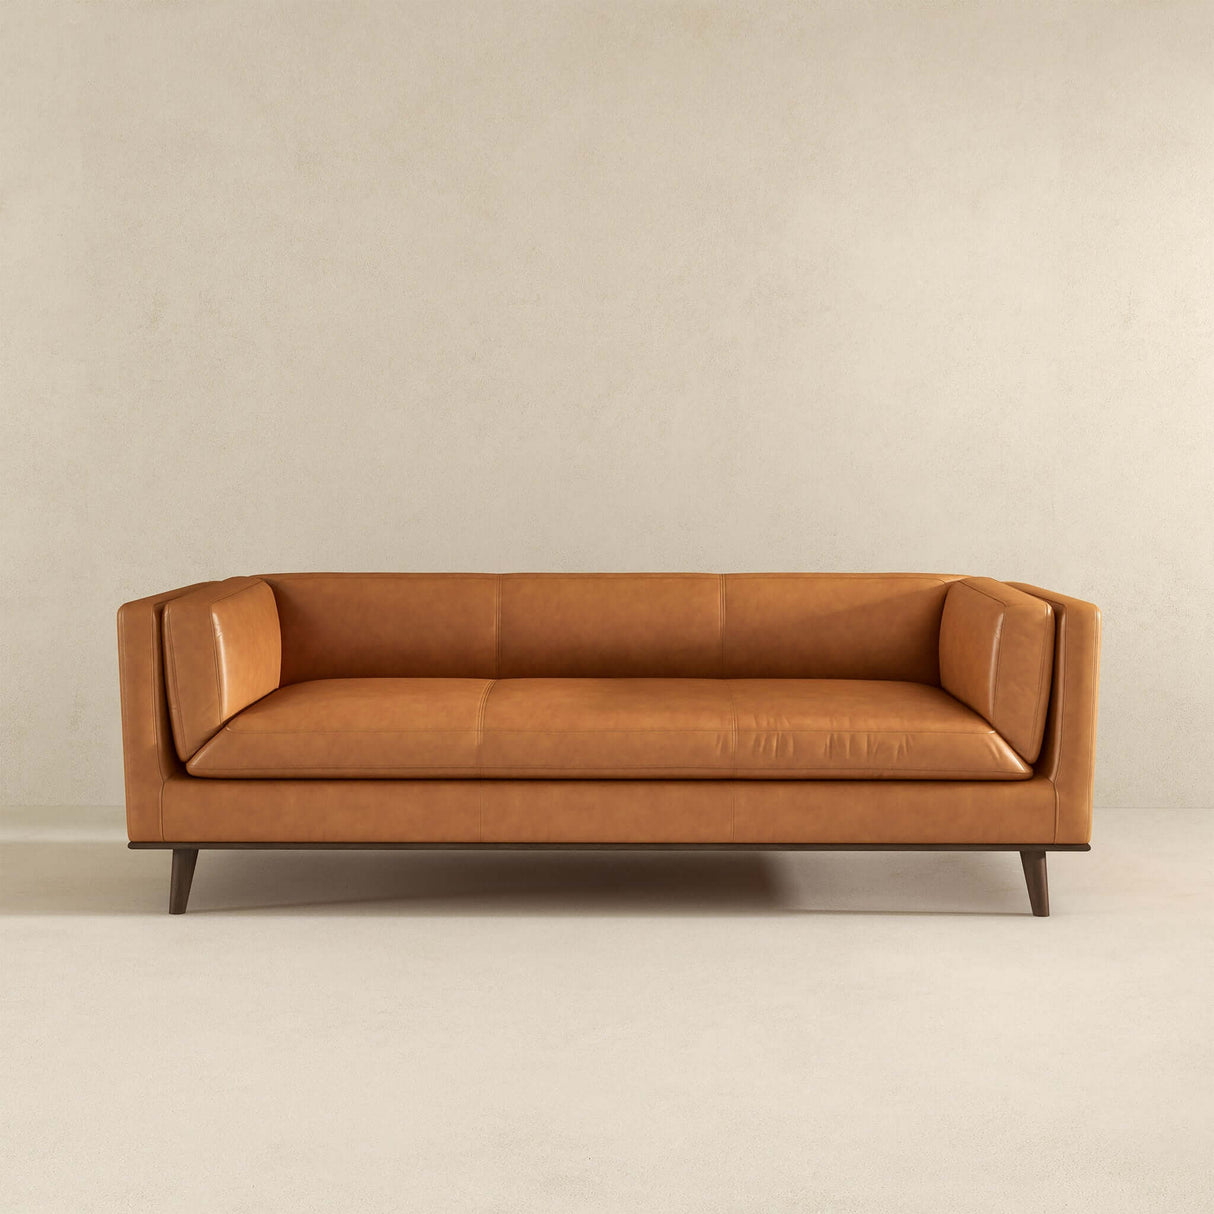 Light tan leather couch living room